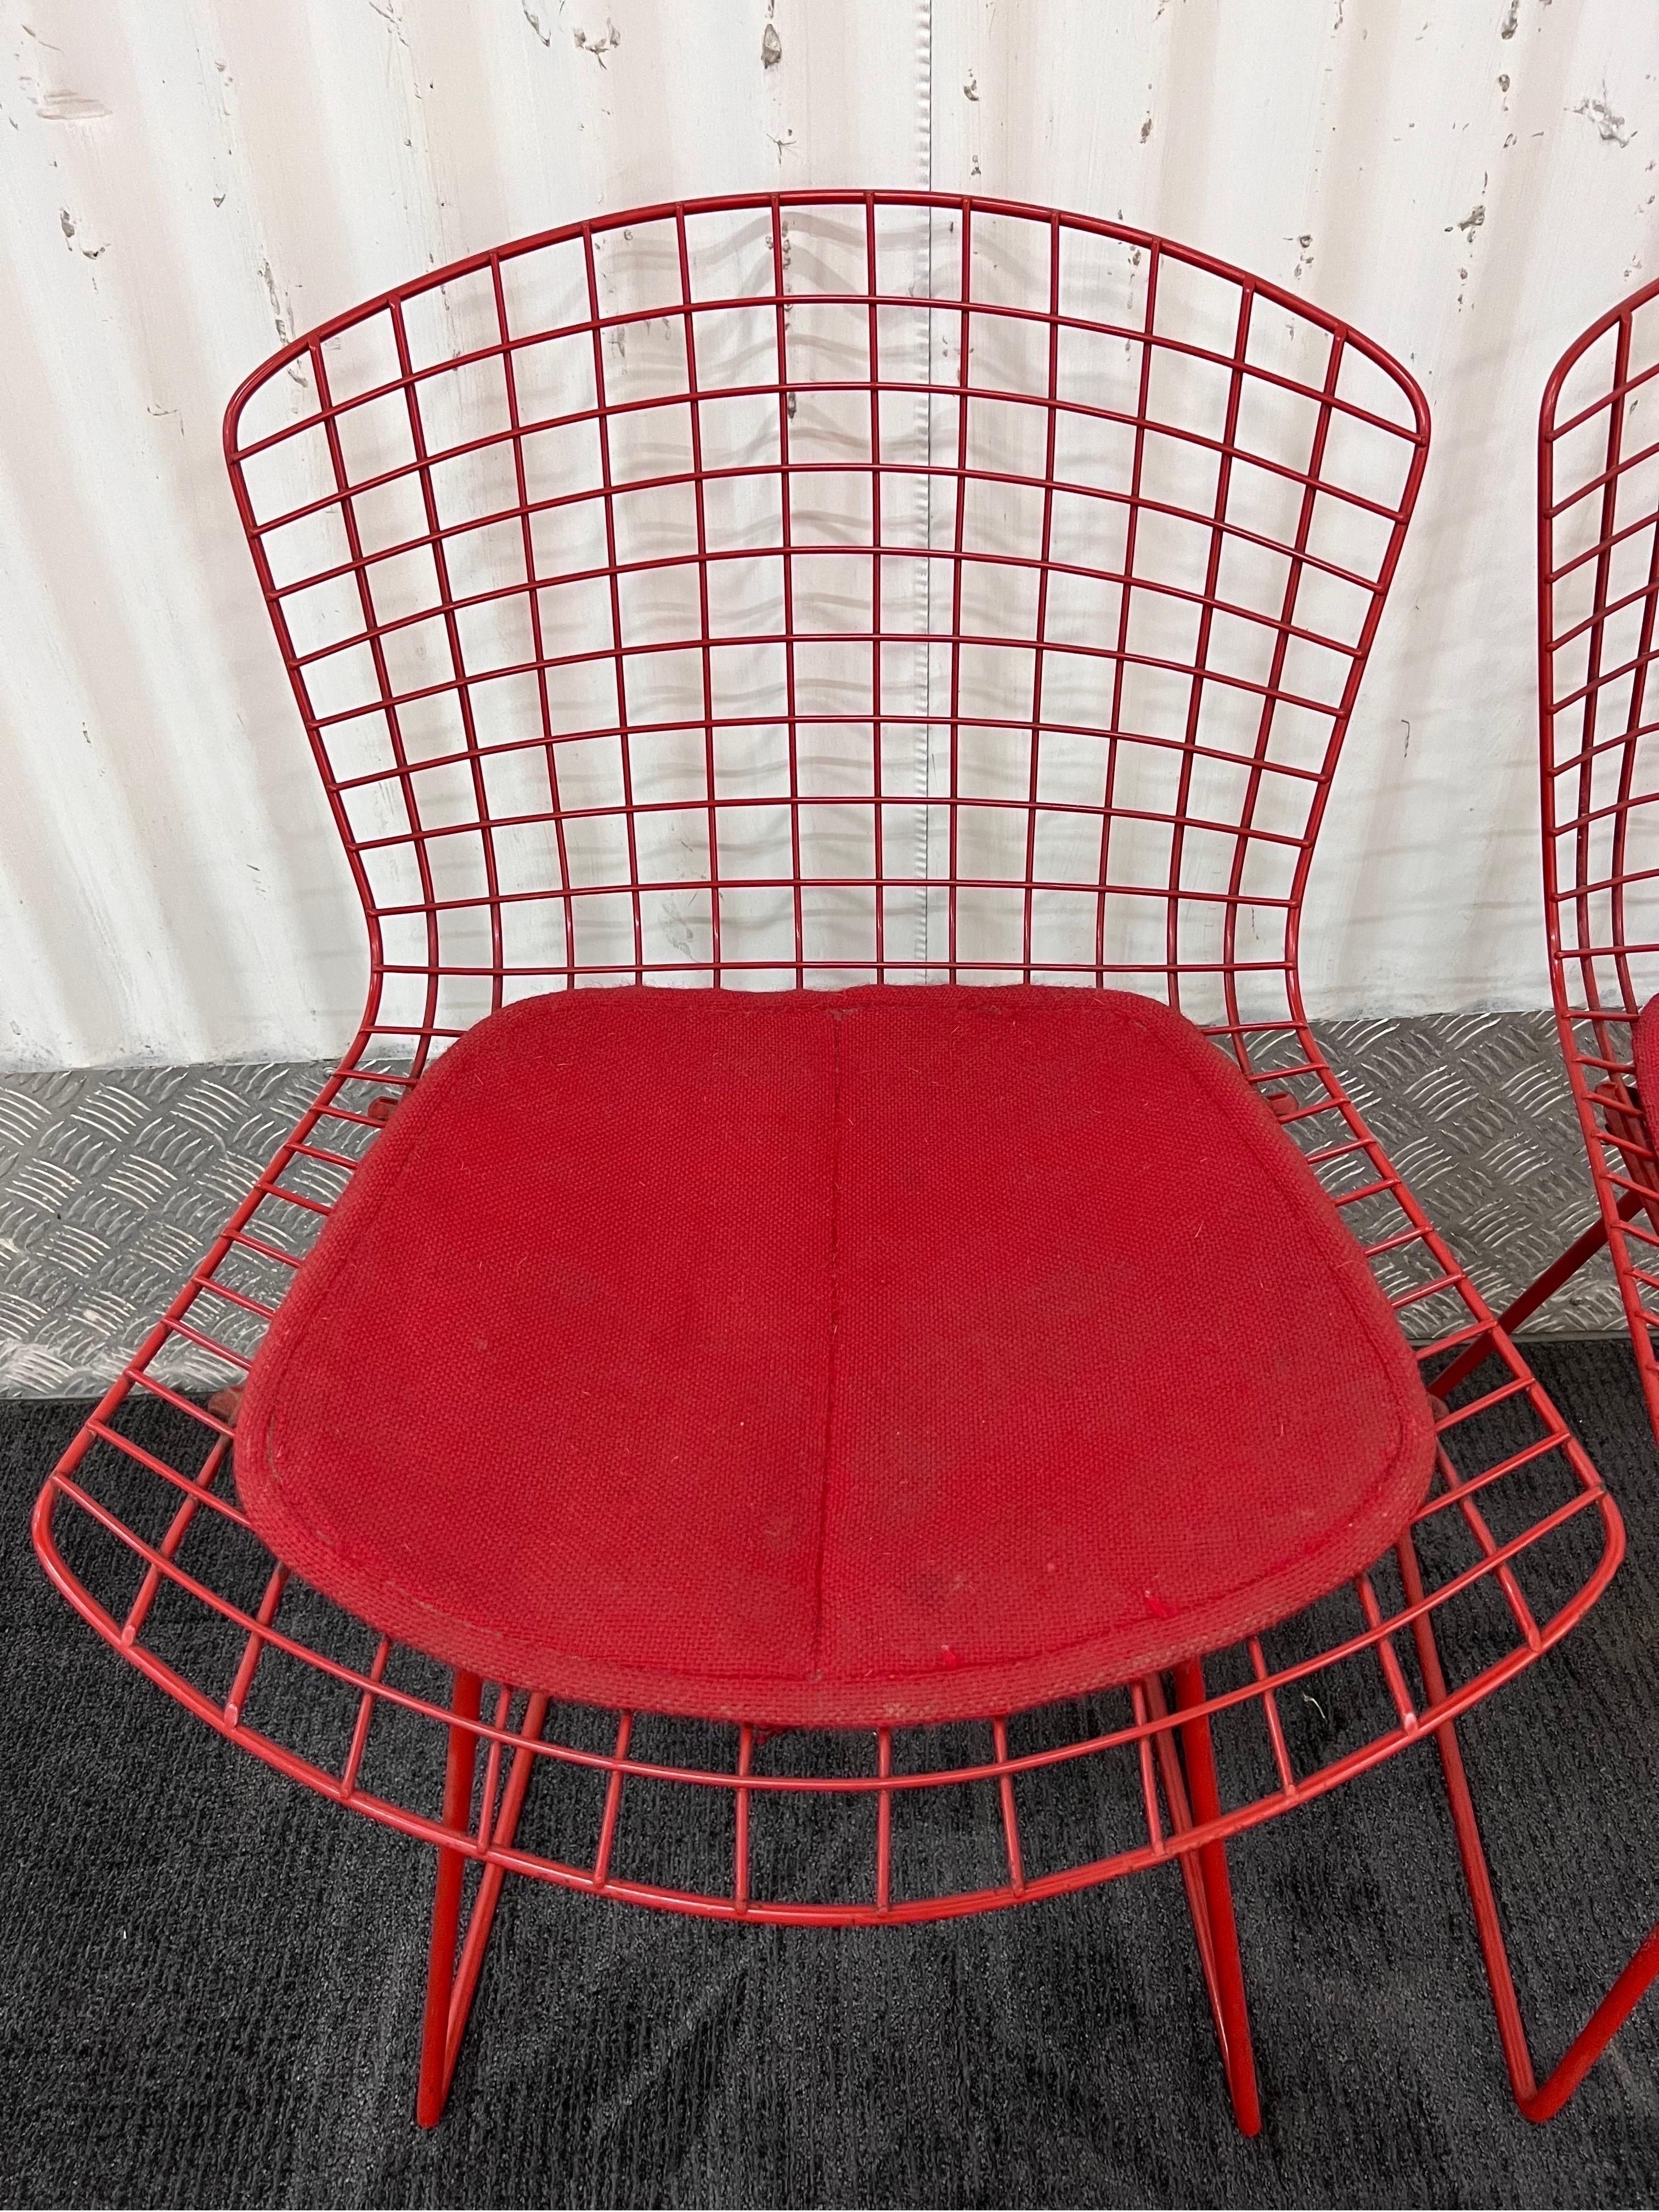 Brazilian Harry Bertoia Wire Side or Dining Chairs for Knoll, a Pair